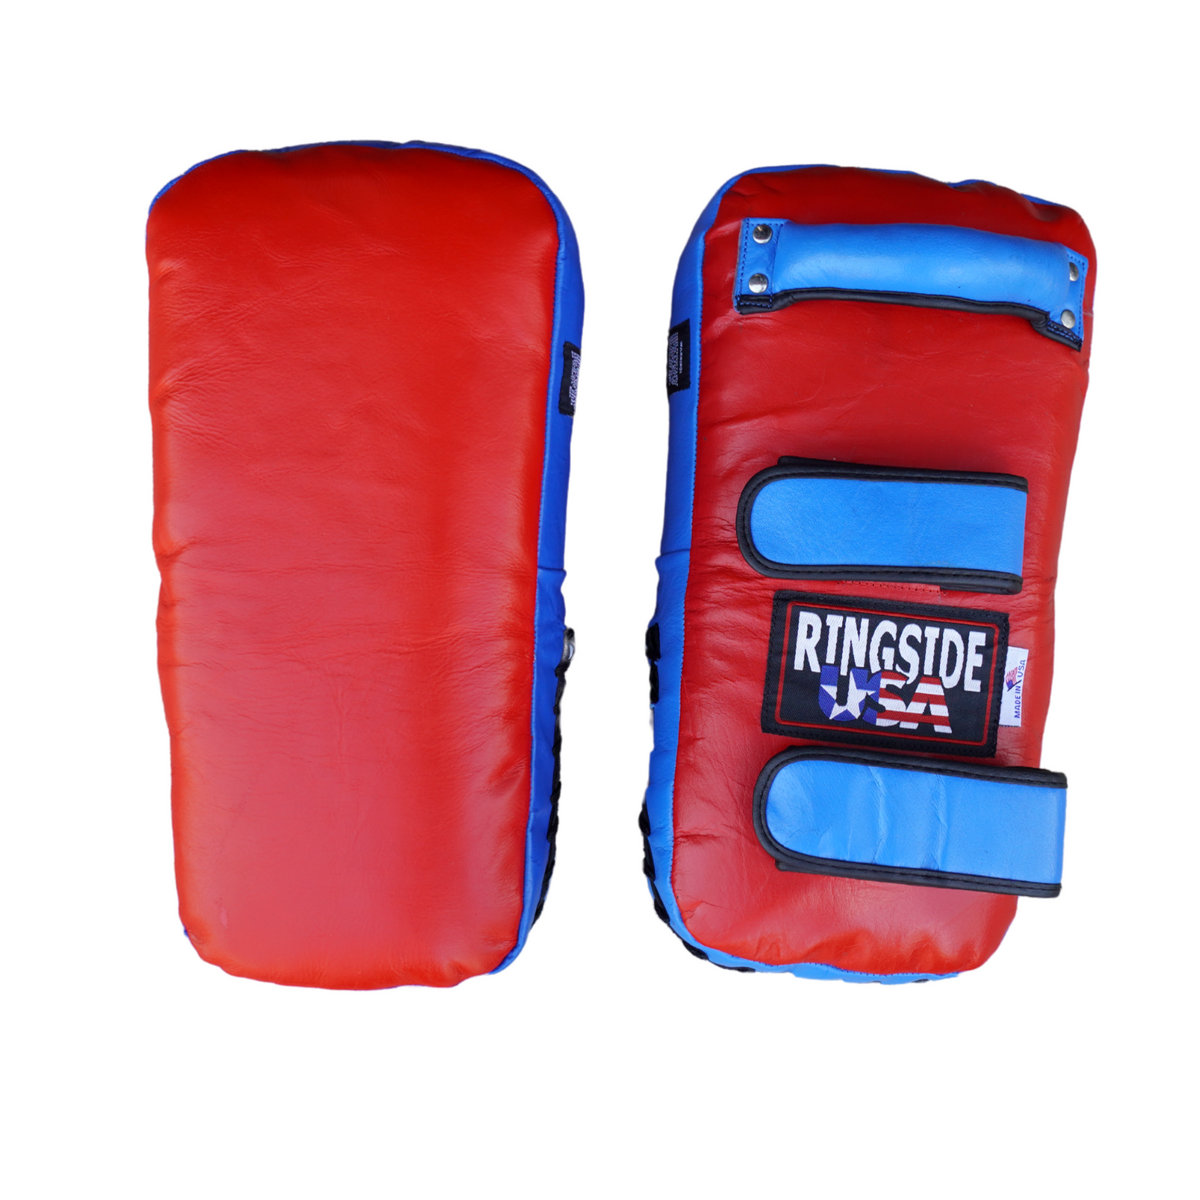 Ring to Cage Grappling slide-fit knee pads for MMA, Kickboxing, stand up  (Small)